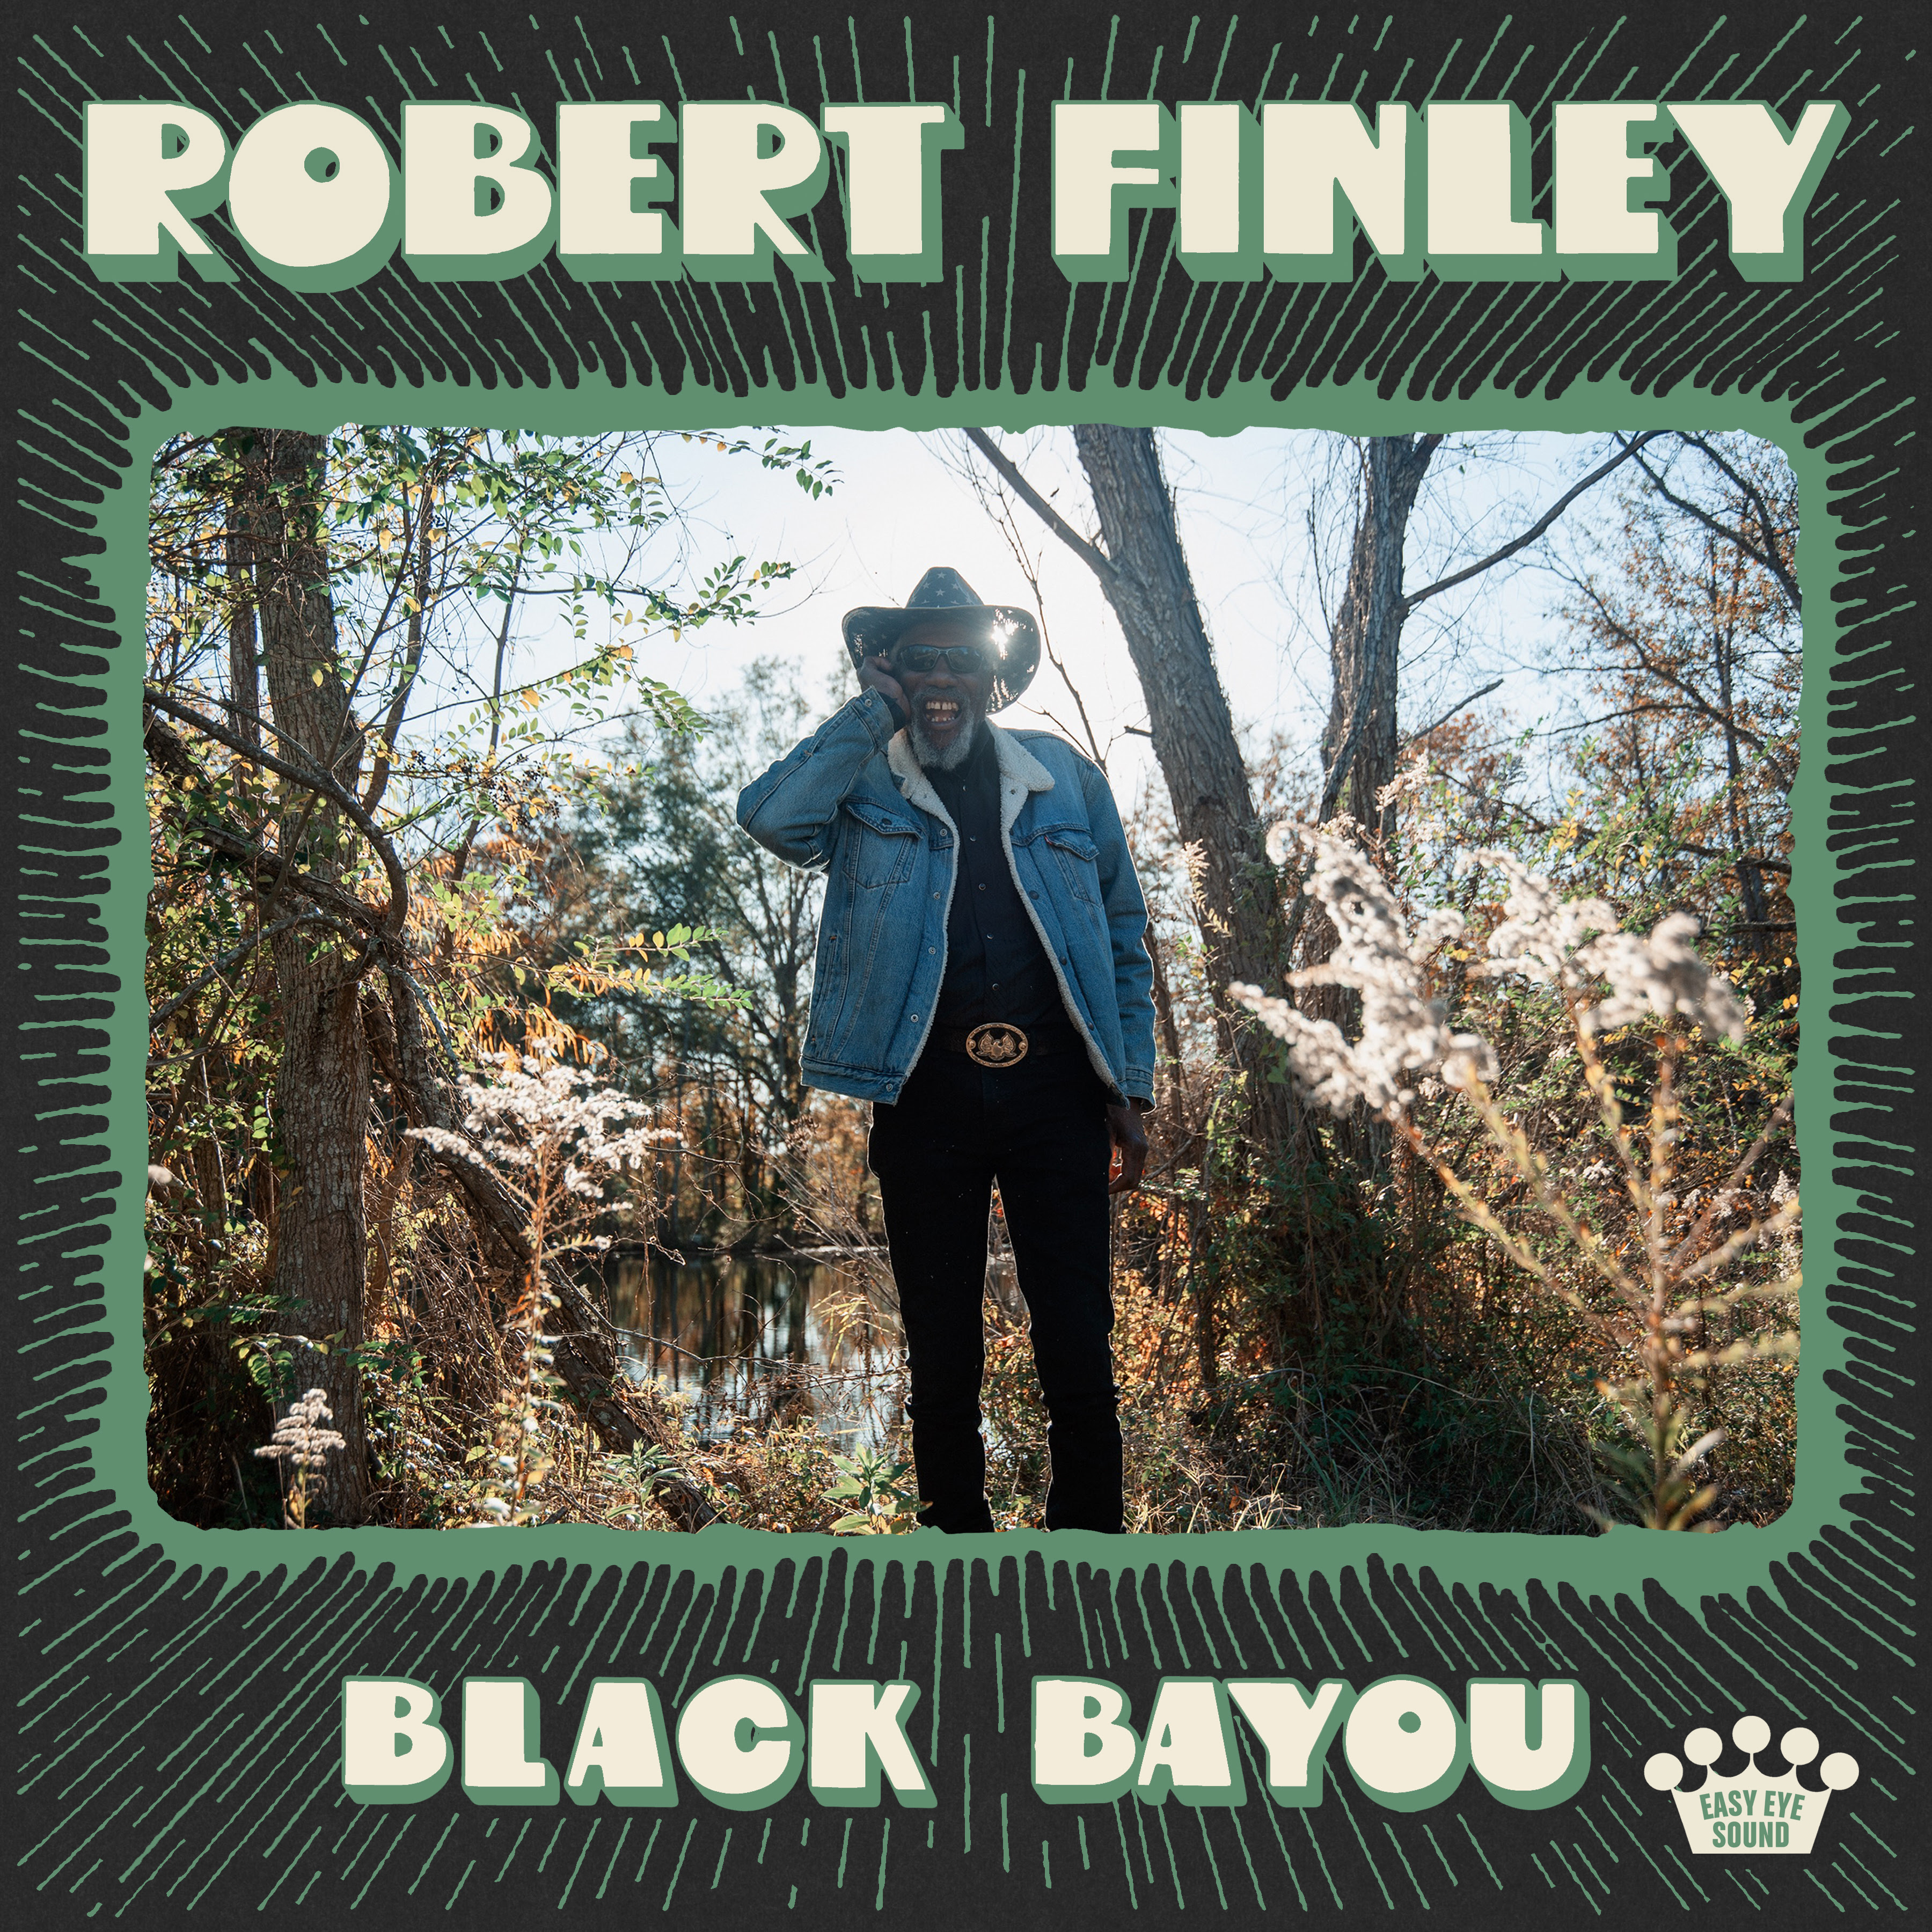 Robert Finley releases his anticipated new album, Black Bayou, out today via Easy Eye Sound; New music video "Waste of Time" featuring The Black Keys